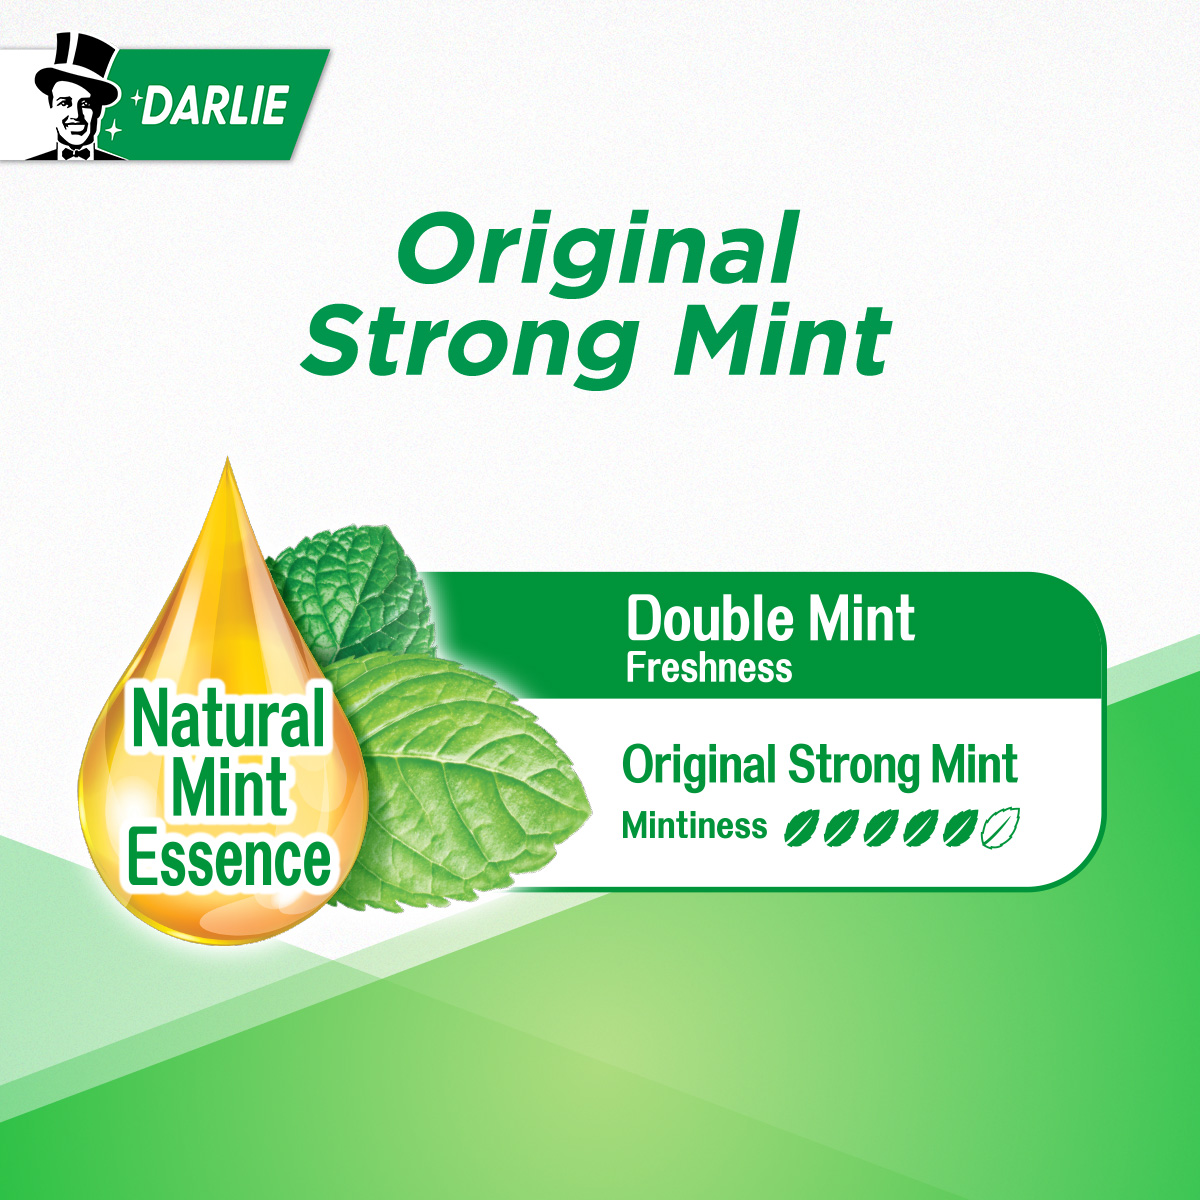 Darlie Double Action Fresh + Clean Toothpaste Original Strong Mint 250g